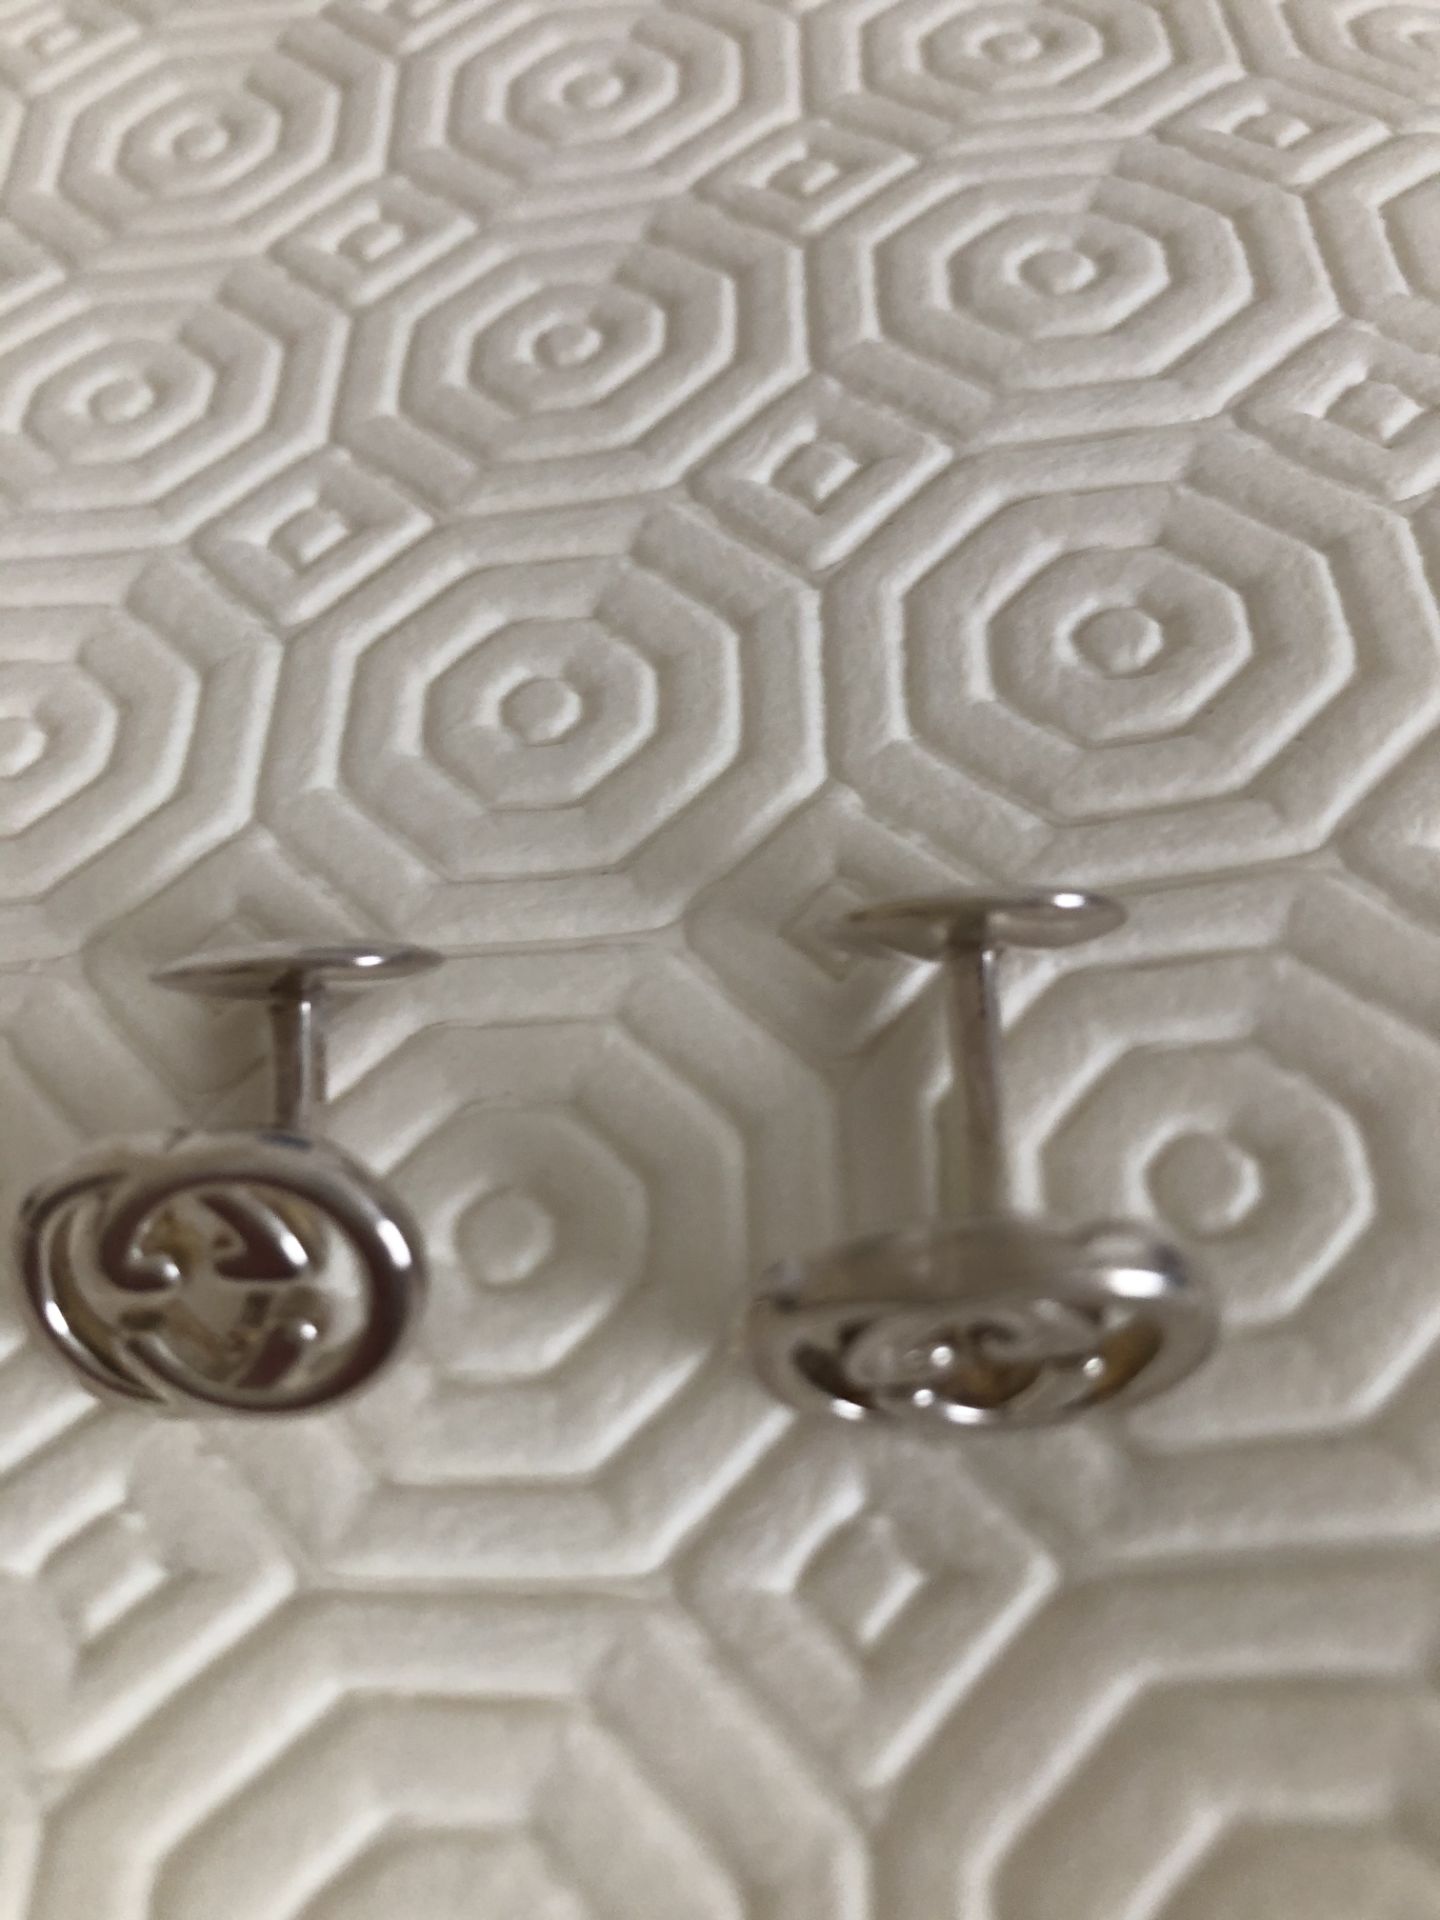 Gucci Silver Cuff Links - Image 4 of 4